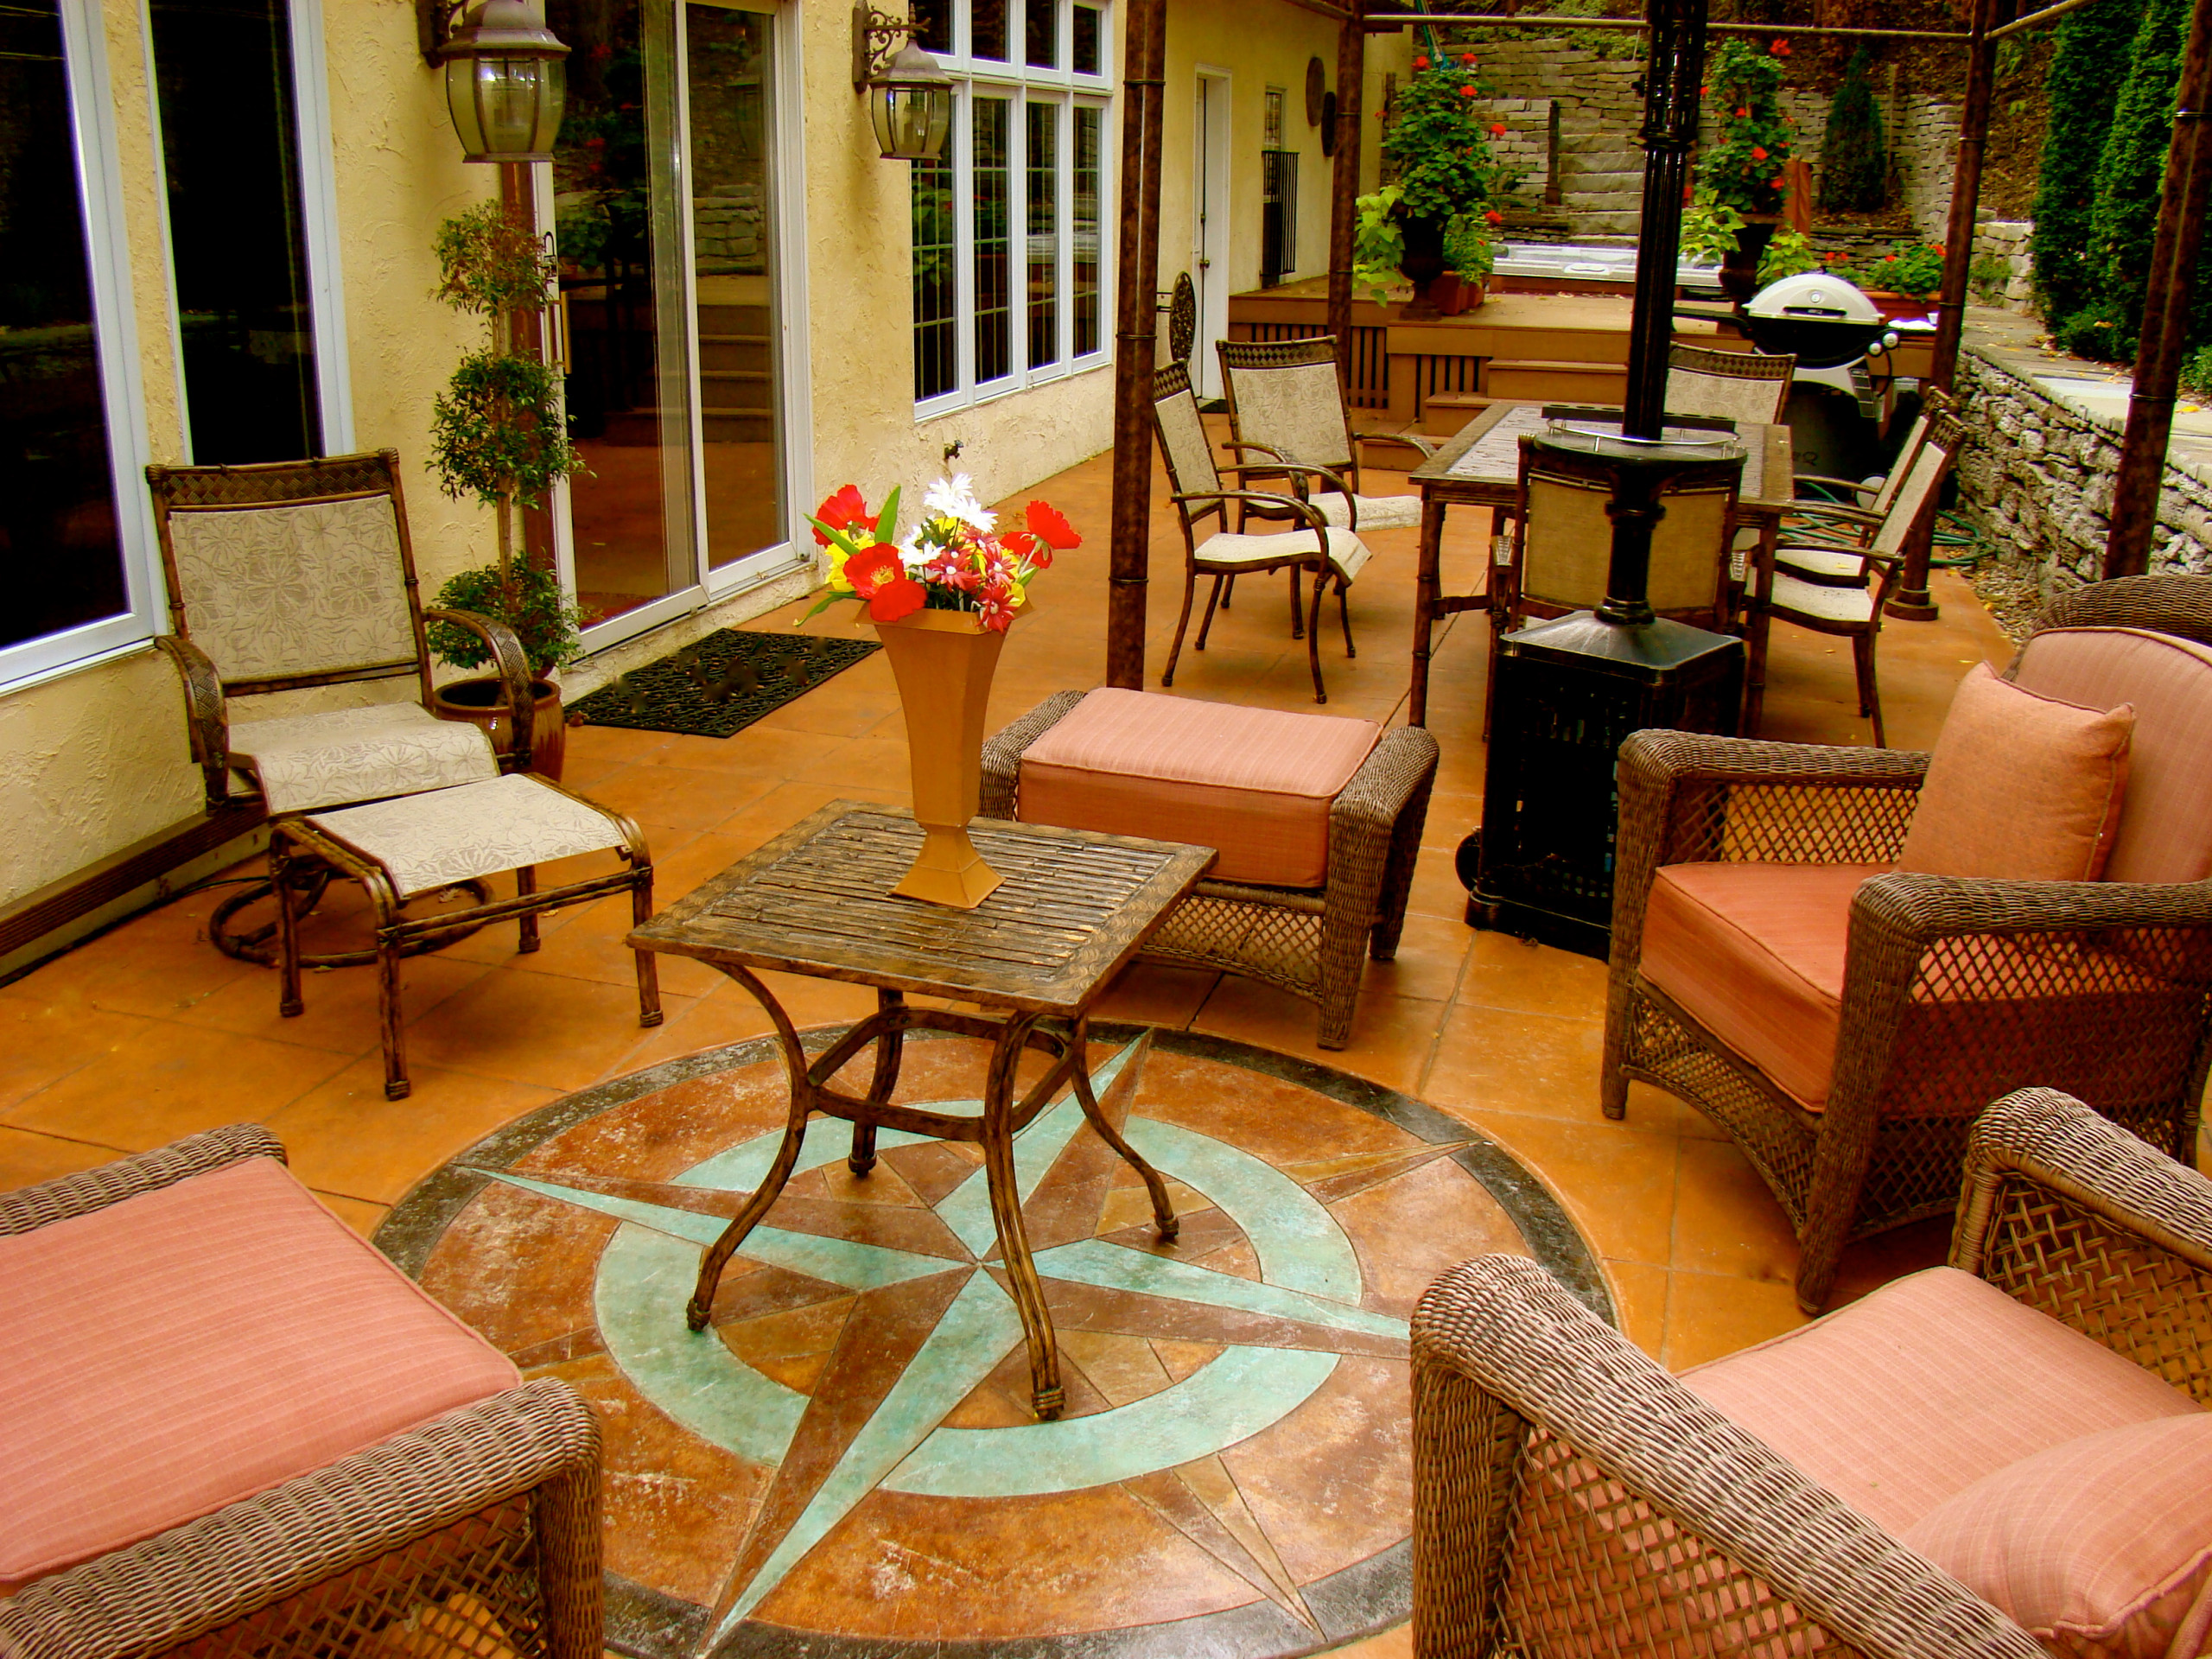 A Stamped Concrete Patio